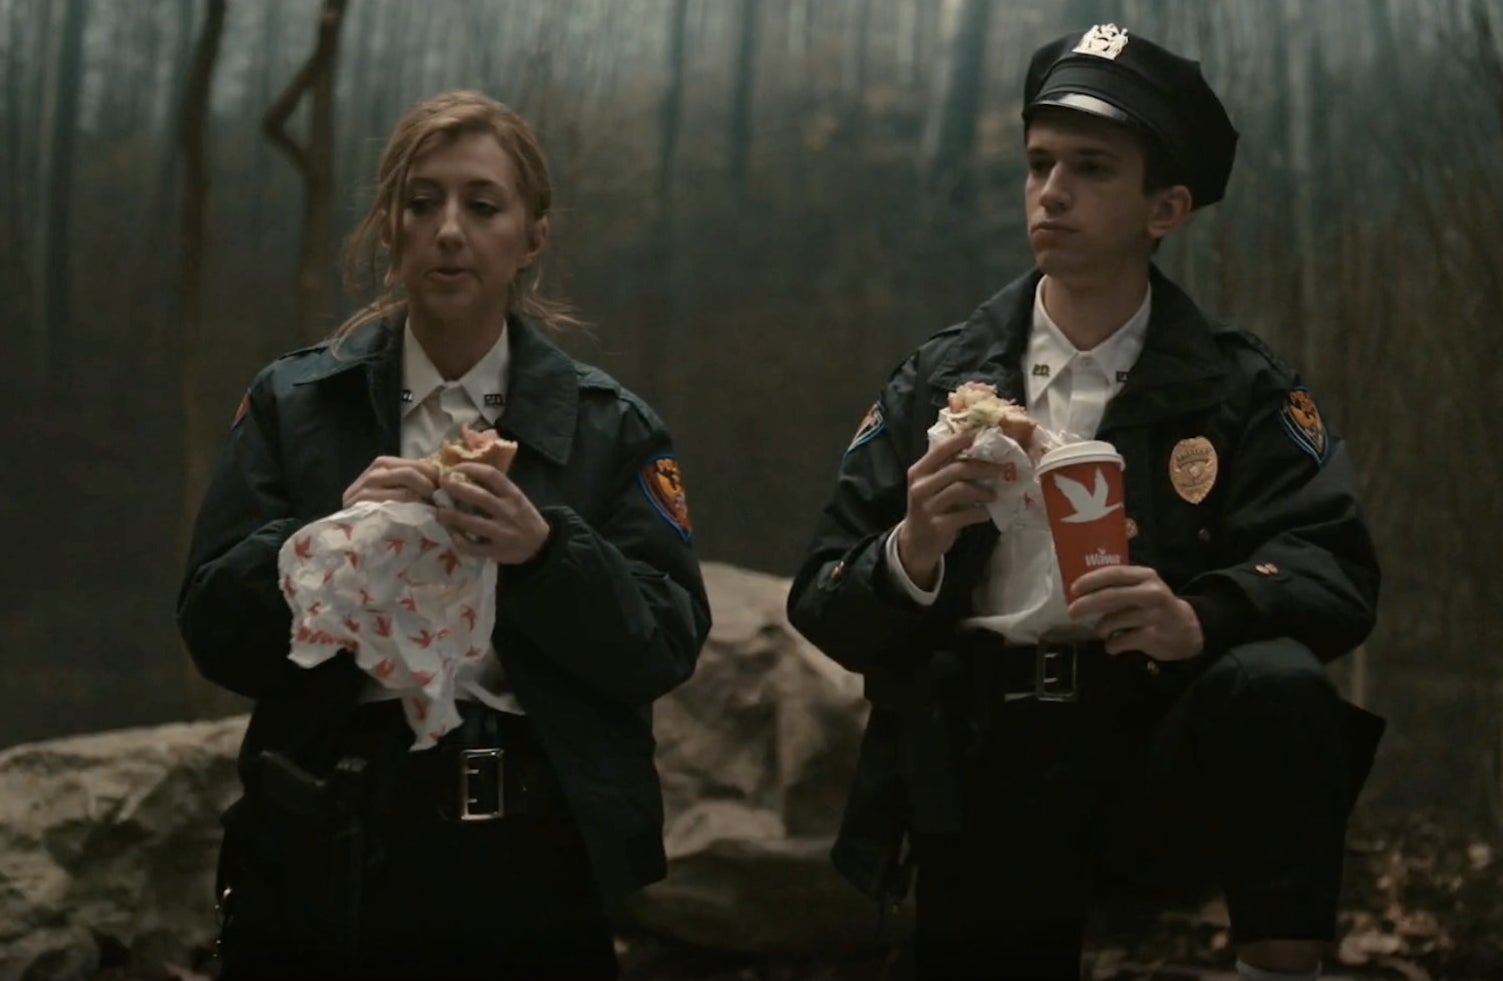 SNL cast members in cop uniform with Wawa sandwiches and coffee